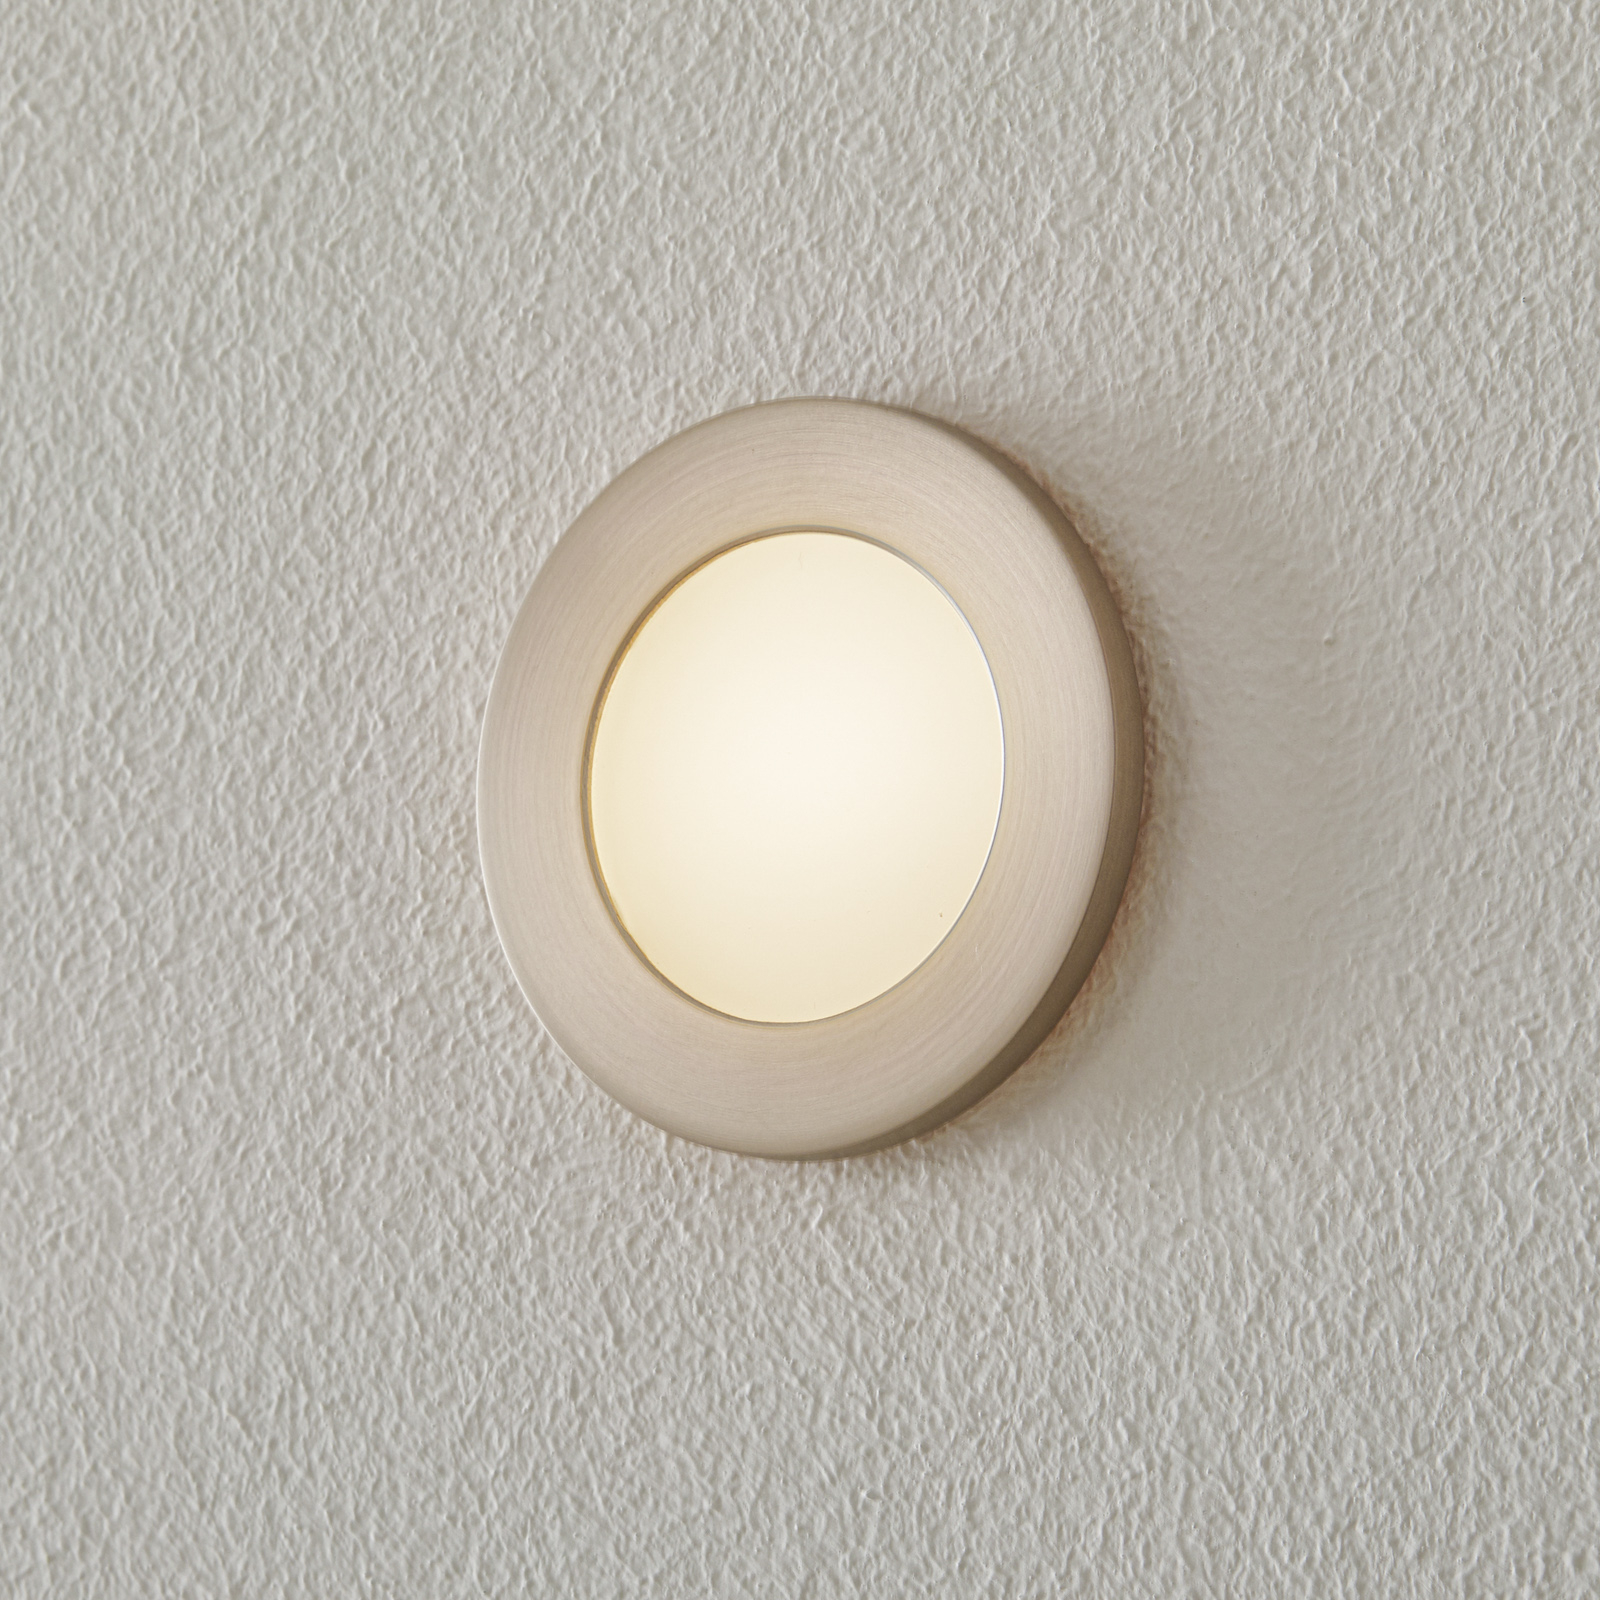 BEGA Accenta wall lamp round frame steel 160lm